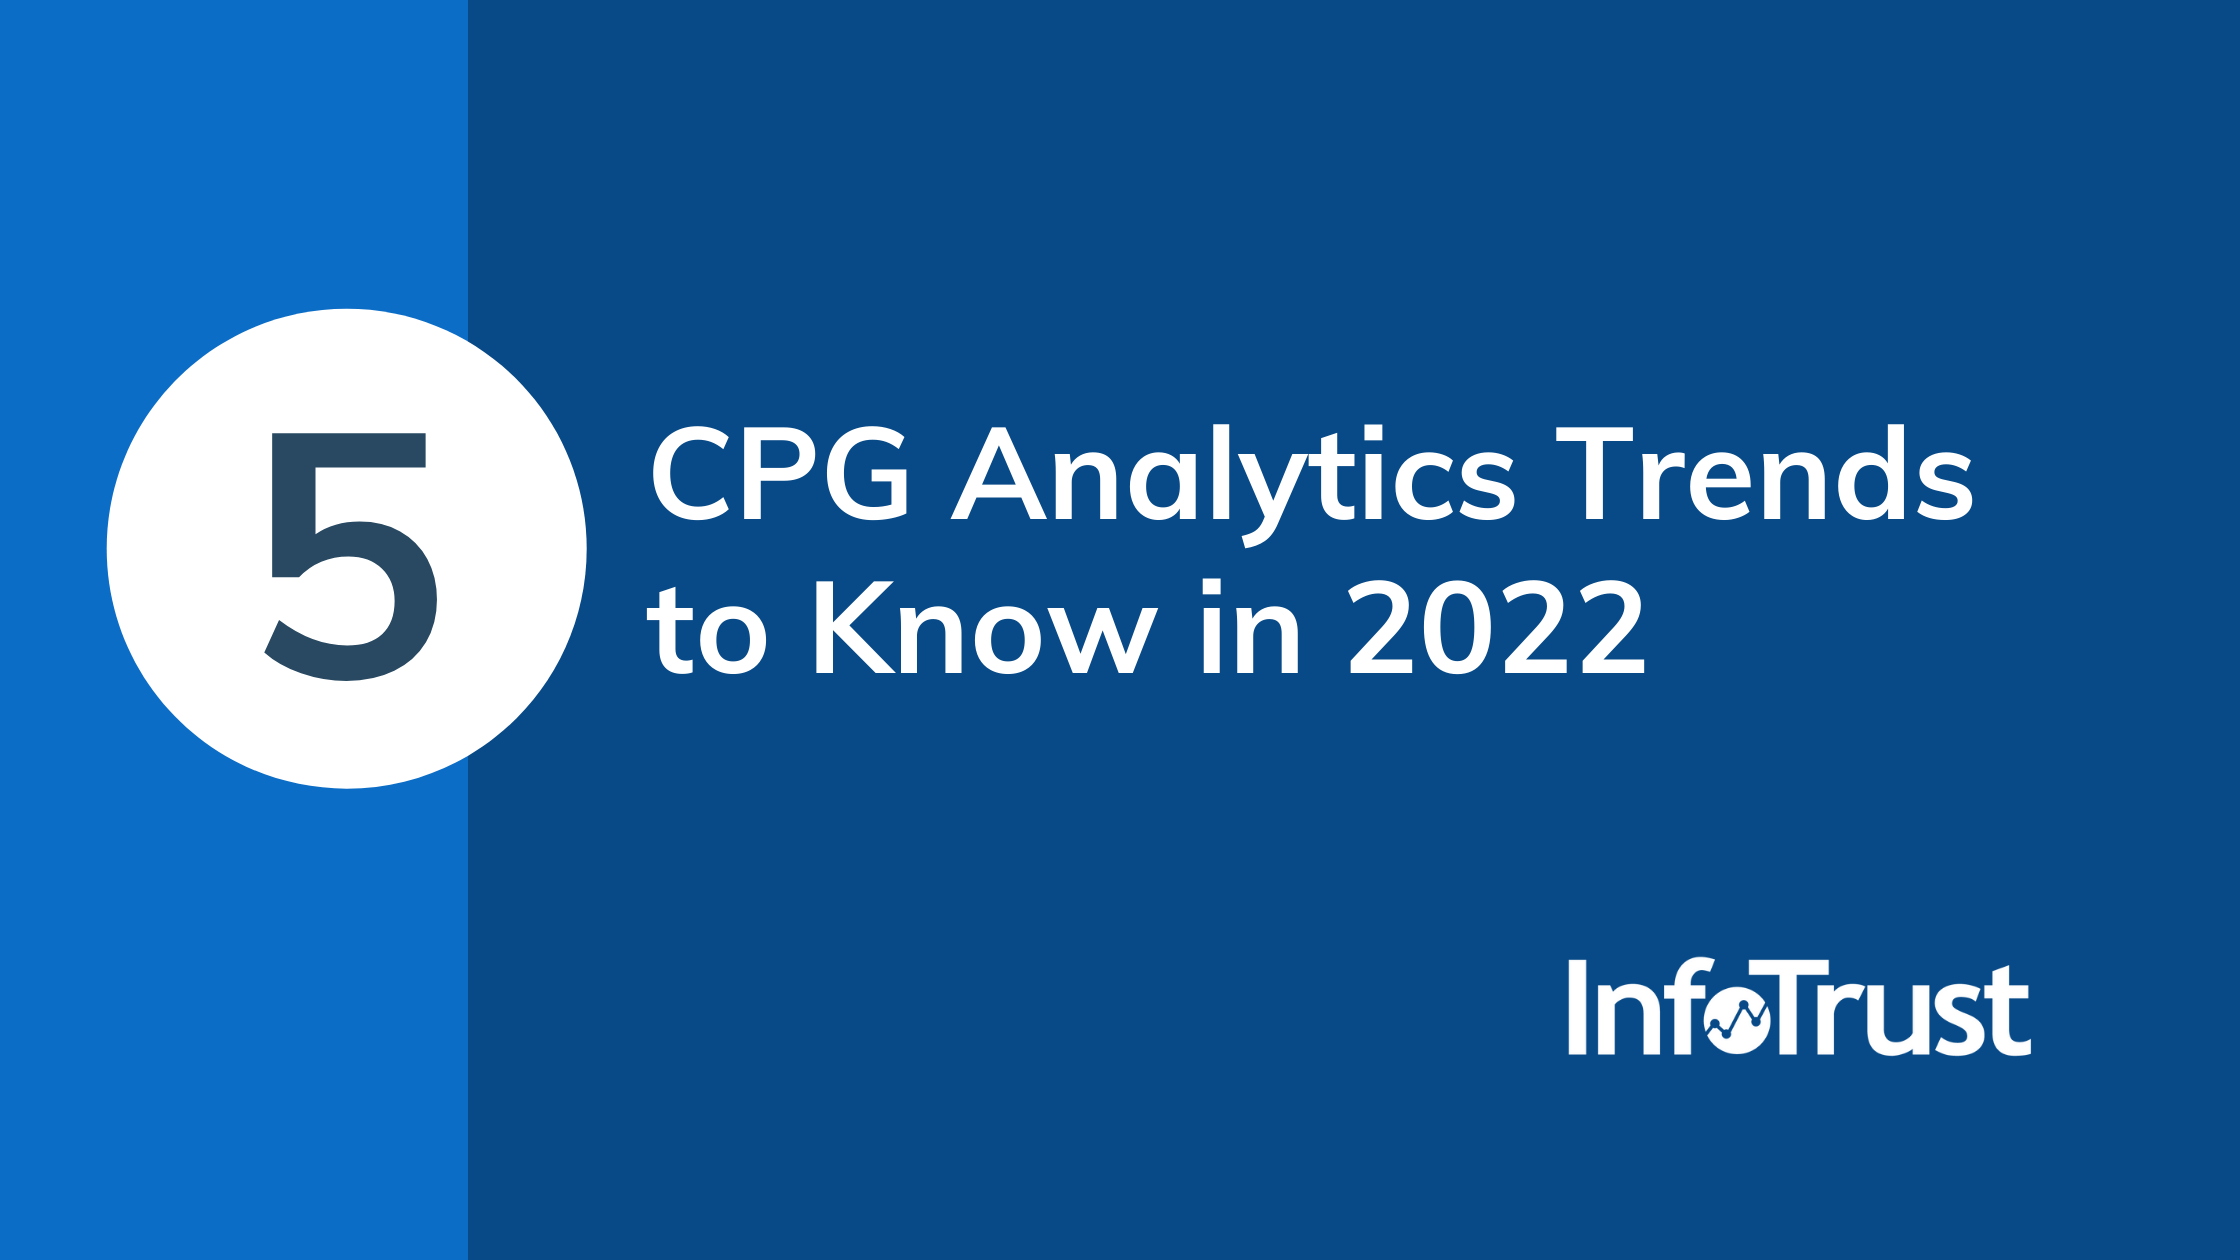 5 CPG Analytics Trends to Know in 2022